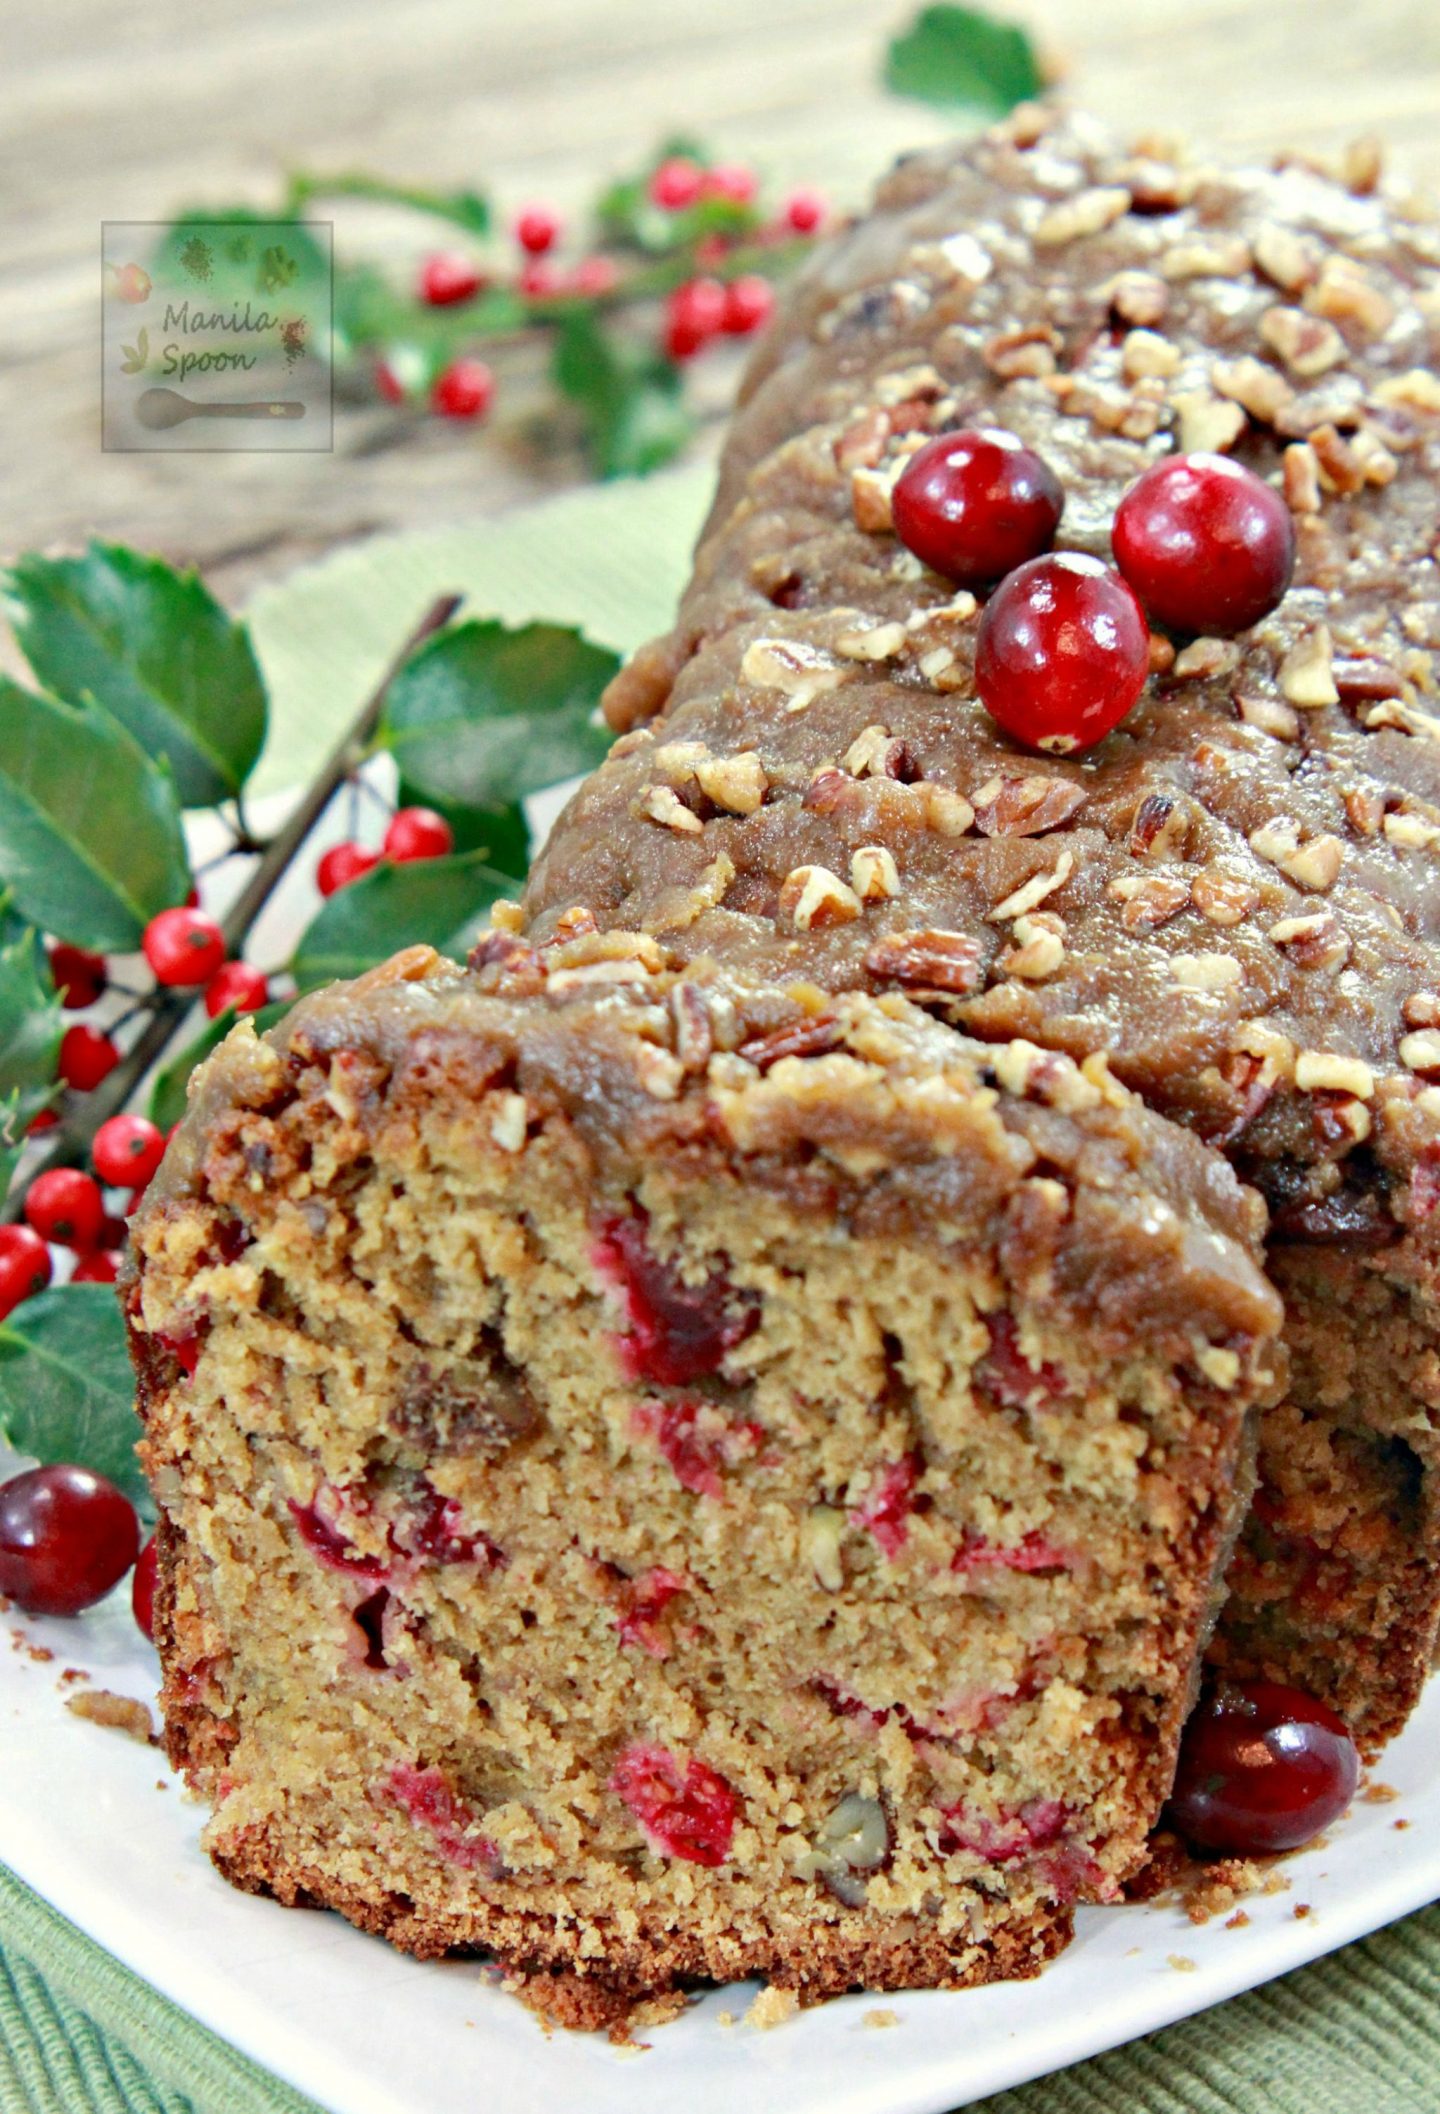  Moist, sweet-tangy, buttery, nutty and with a praline topping that bring this Cranberry Bread over the top – guaranteed deliciousness in every bite! I have served this many times and it's always so loved!!